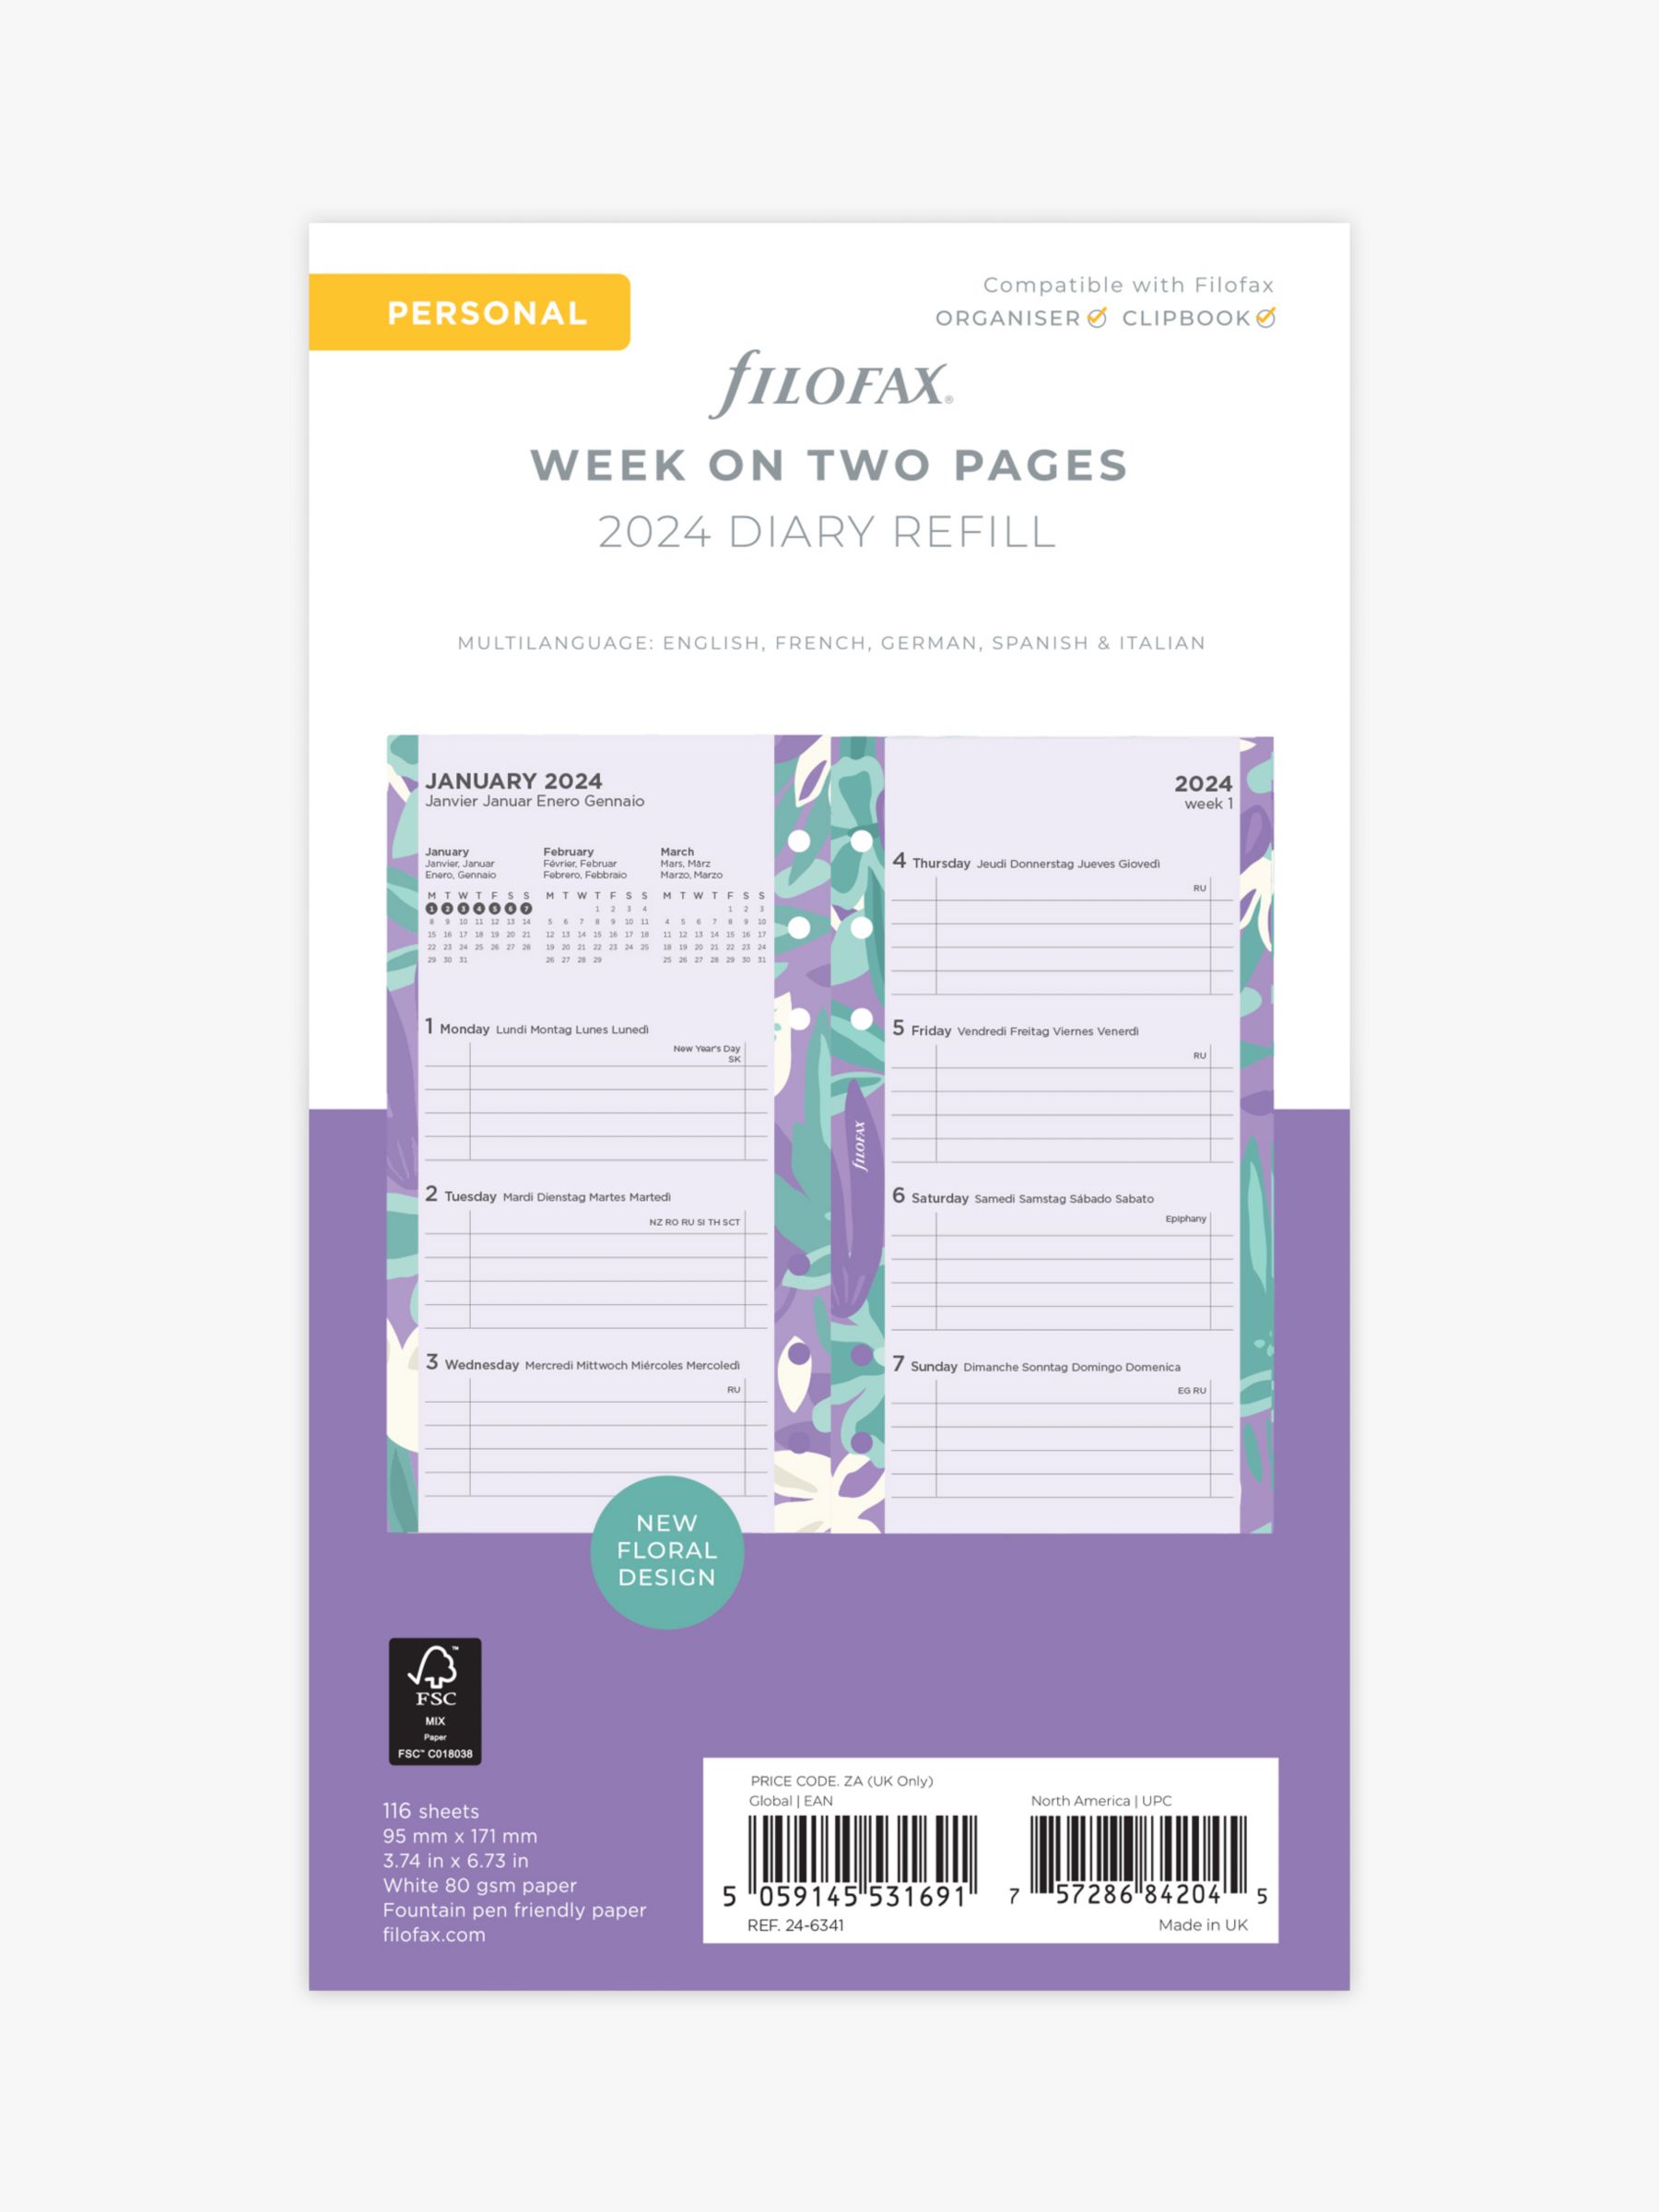 Filofax Personal Floral Week on Two Pages 2024 Personal Organiser Insert,  Multi